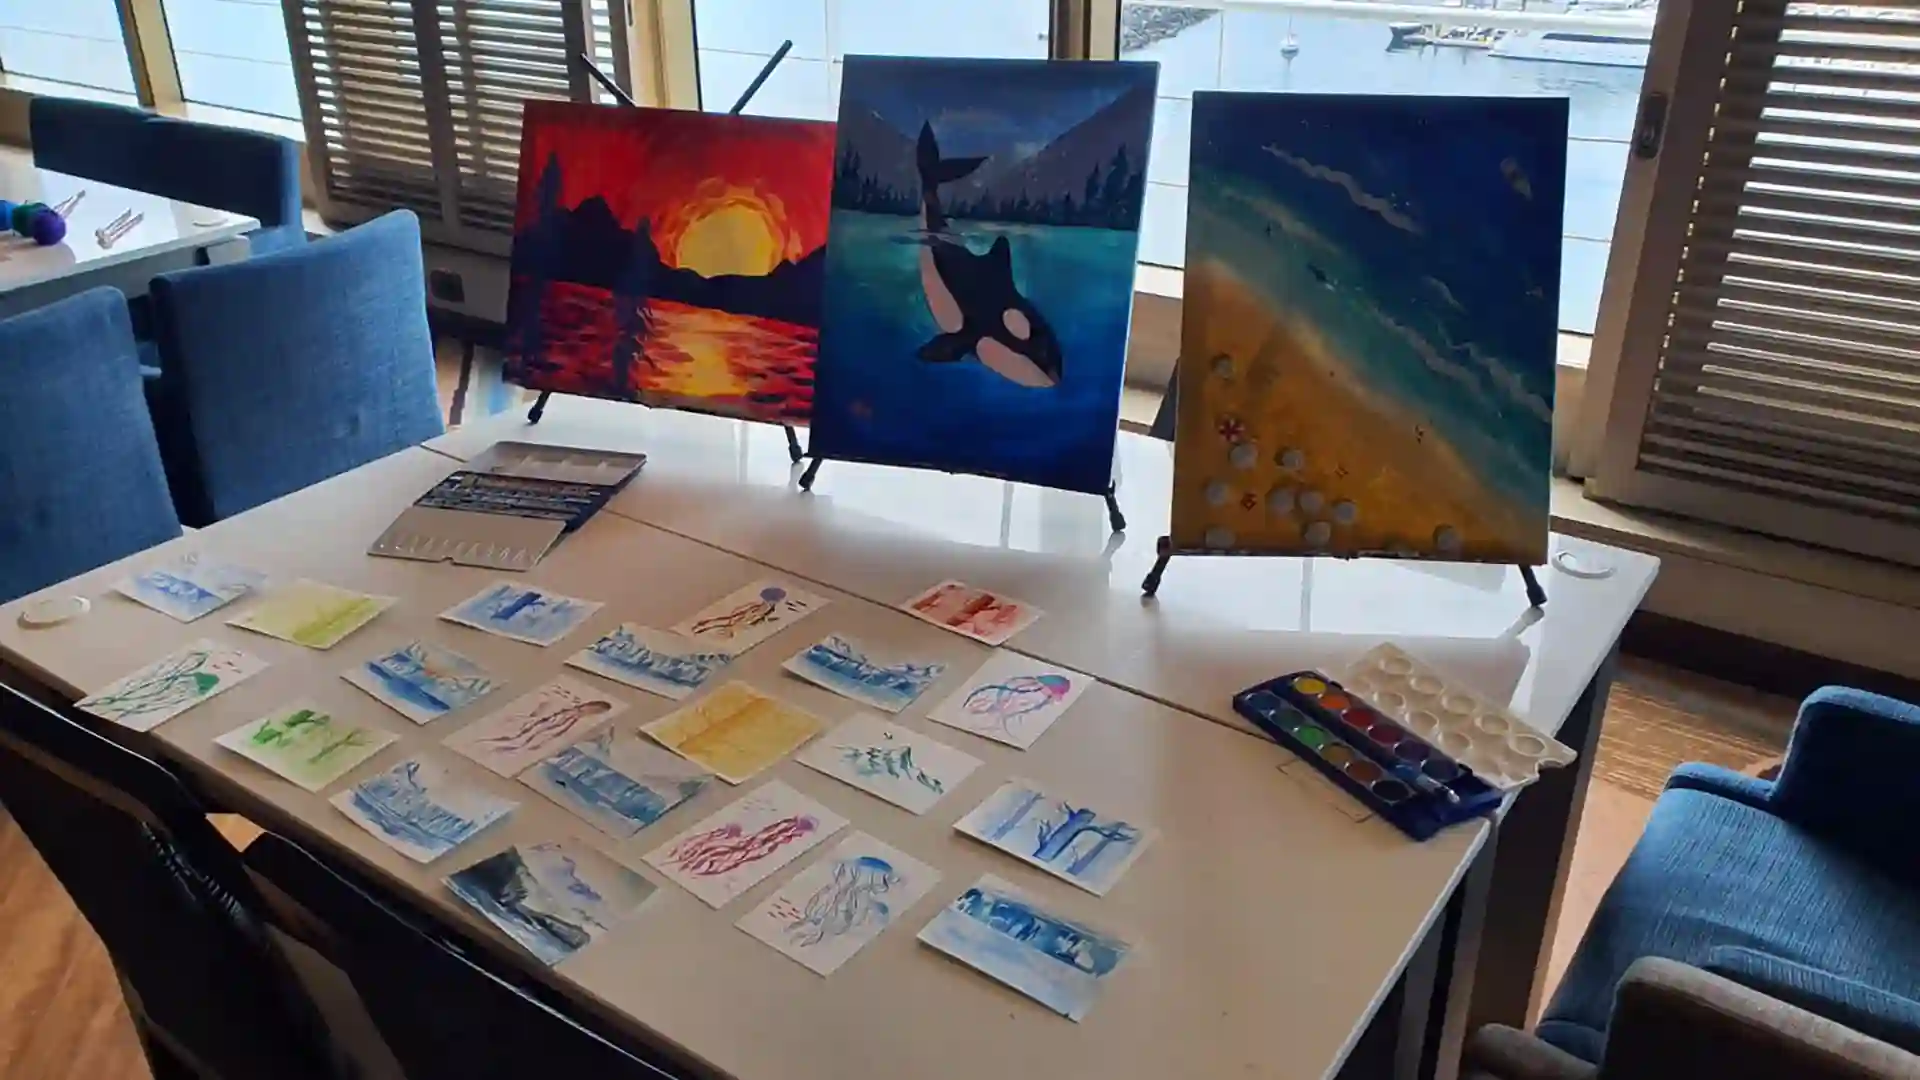 Table covered with art sketches and colorful canvas paintings.